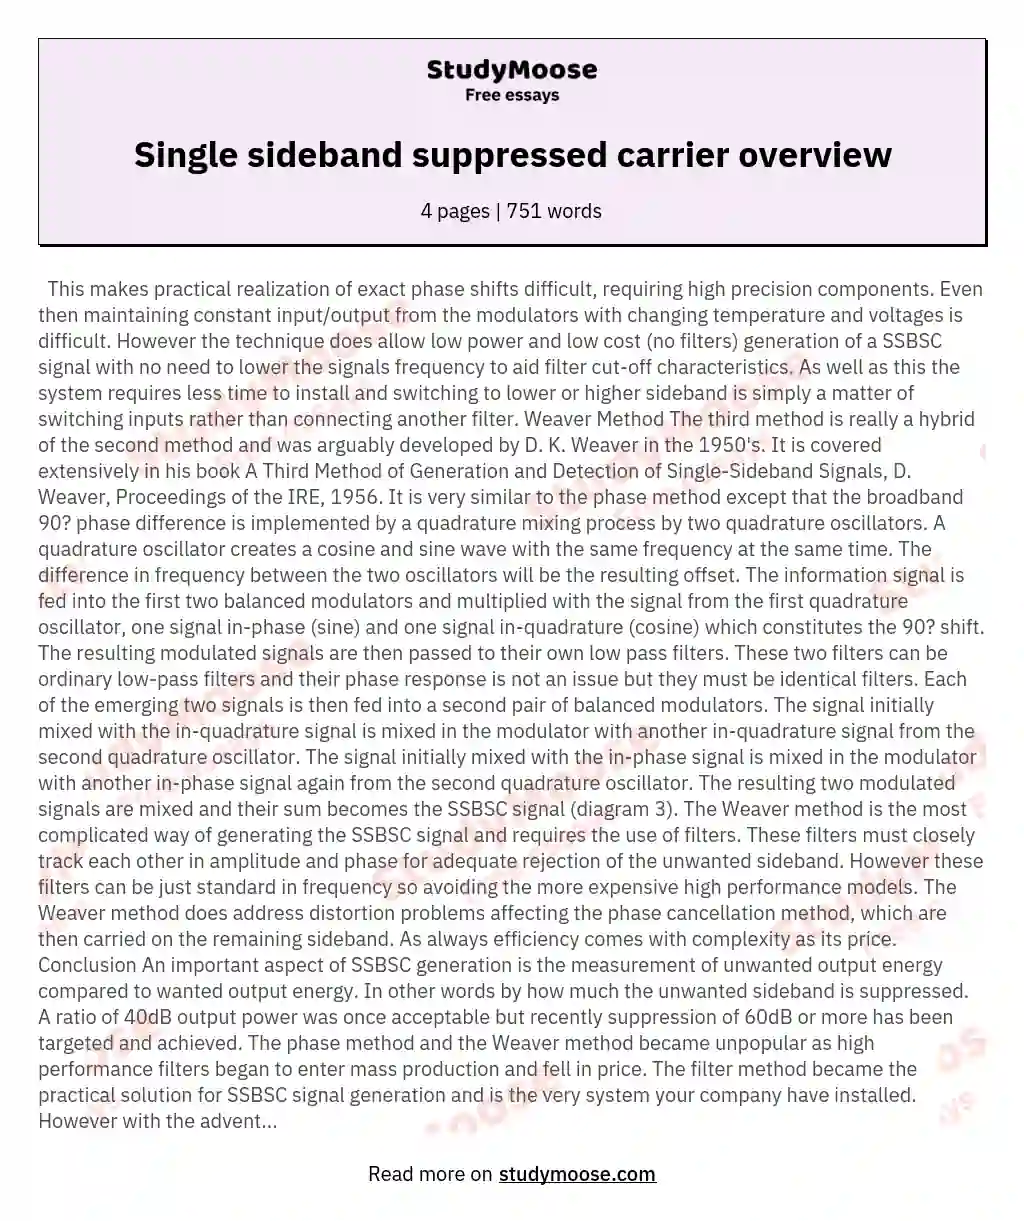 Single sideband suppressed carrier overview